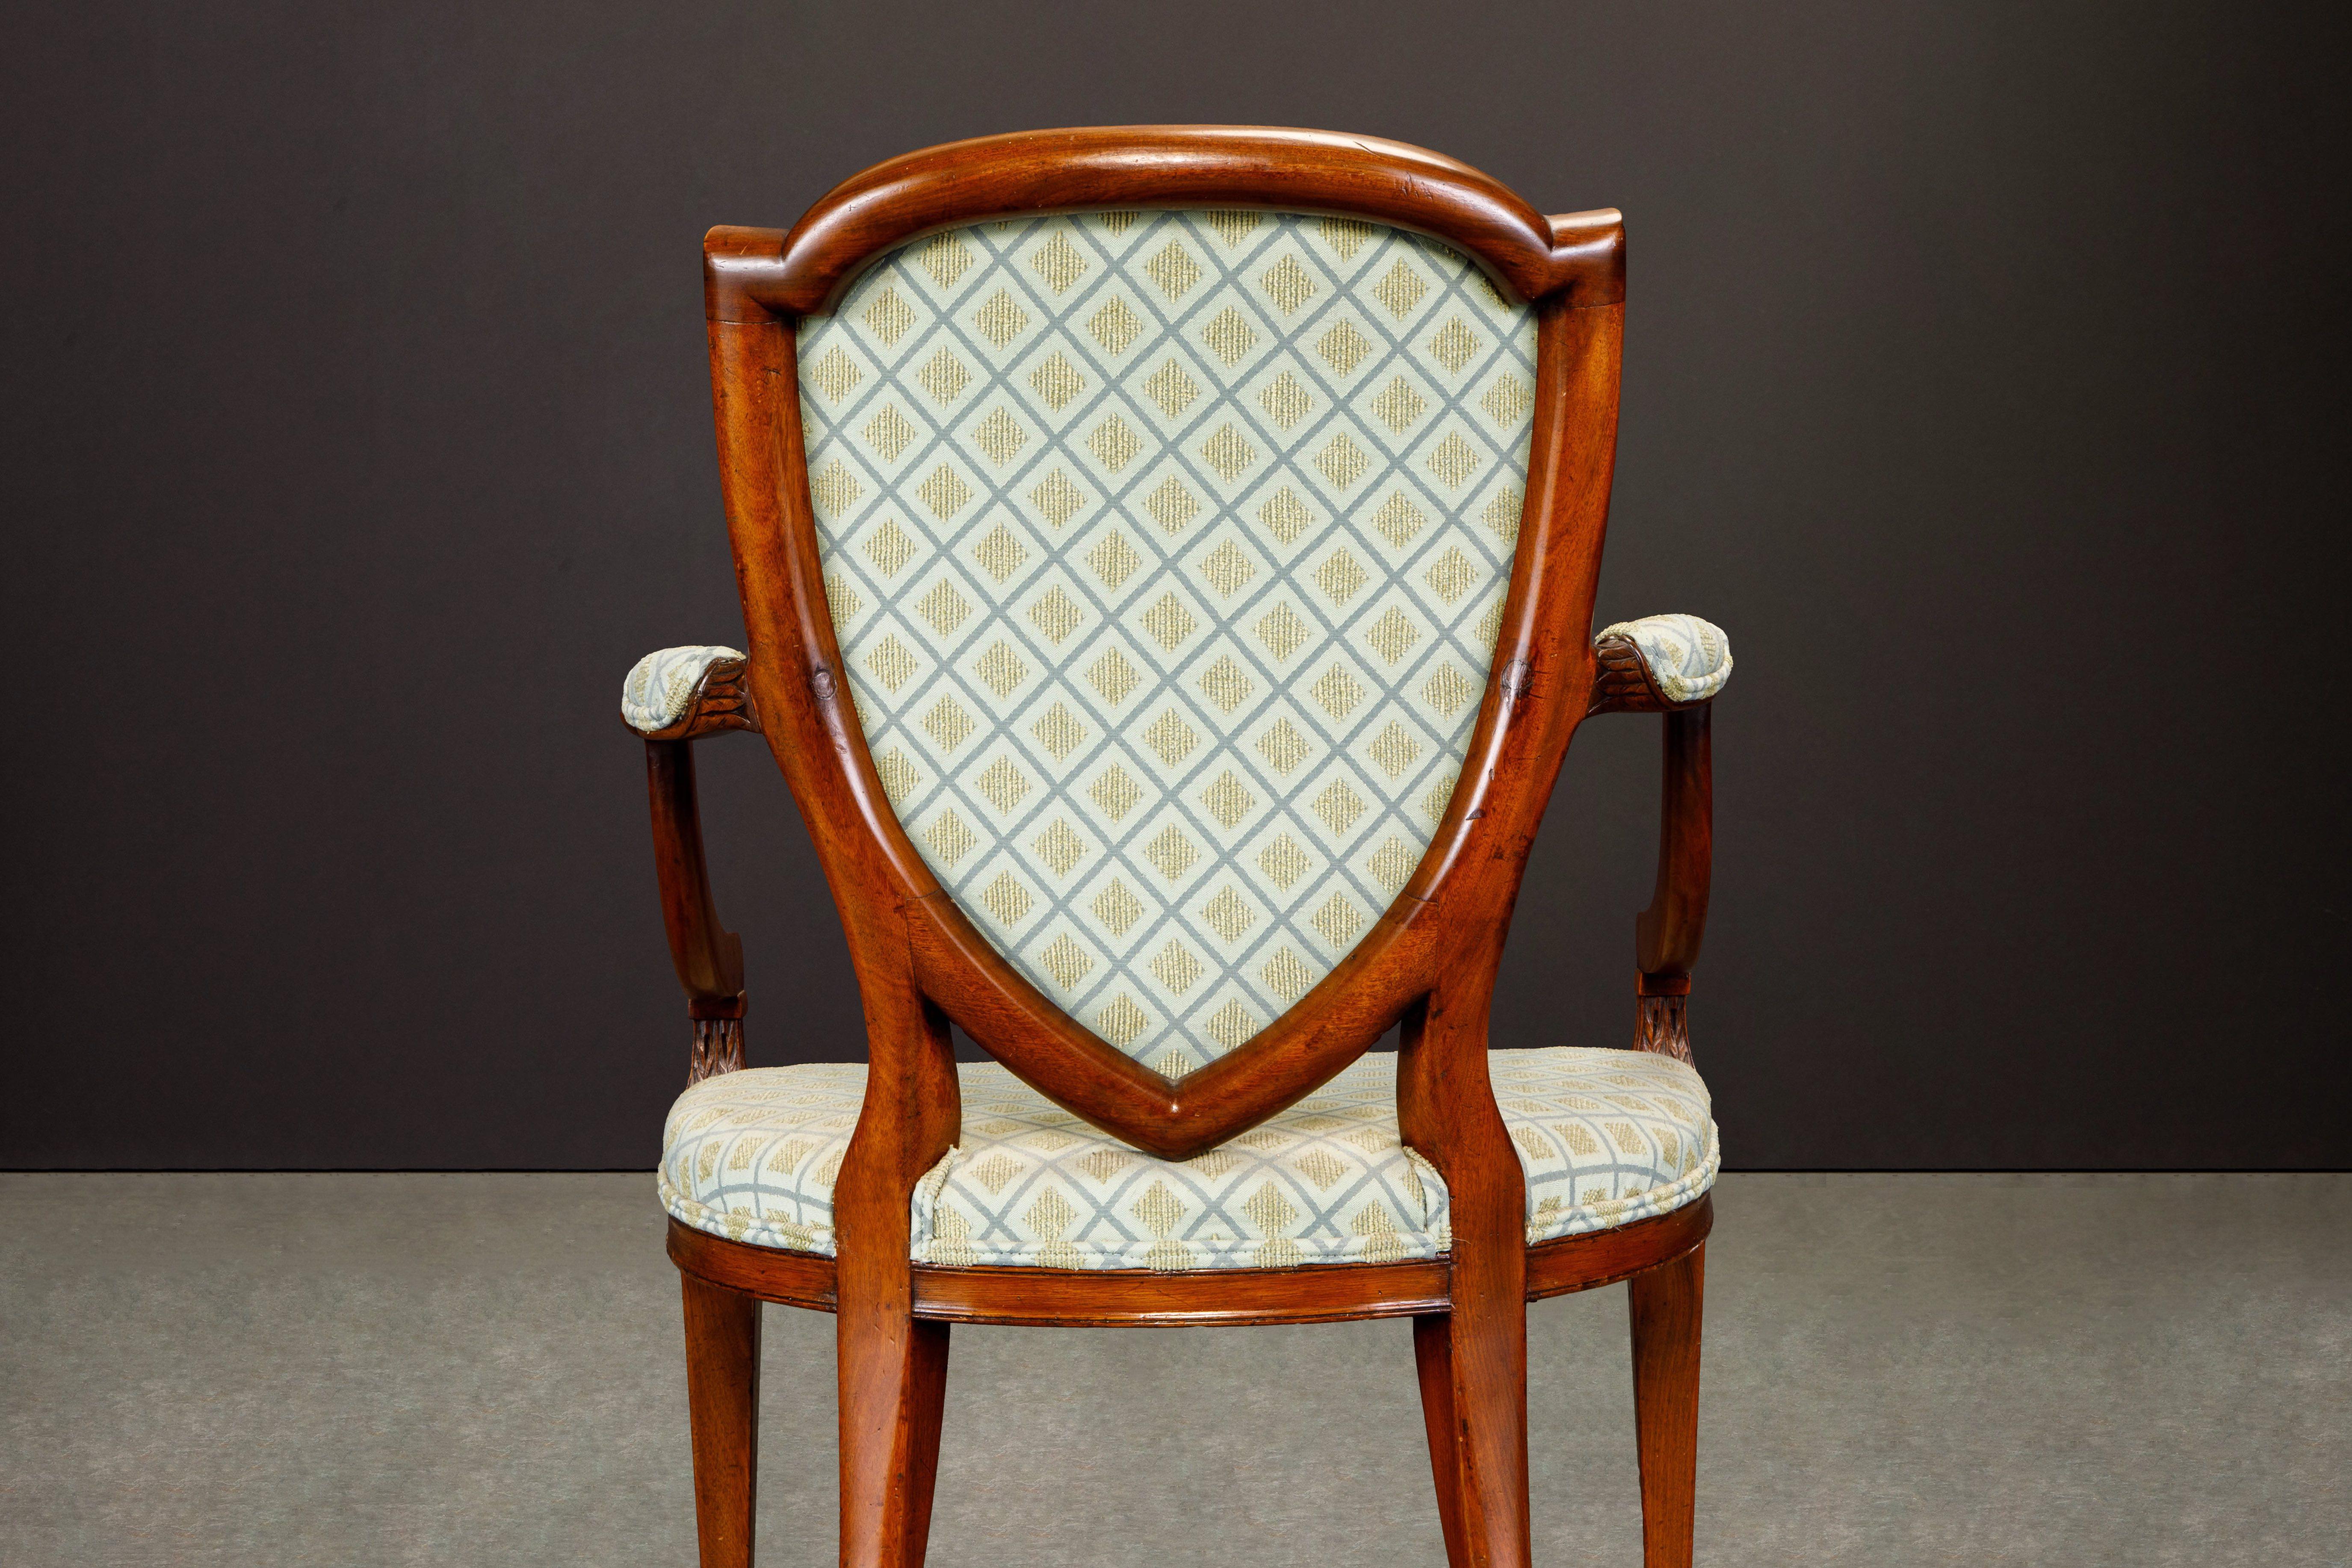 Pair of Upholstered Hepplewhite Shield-Back Armchairs w Provenance, circa 1870s For Sale 6